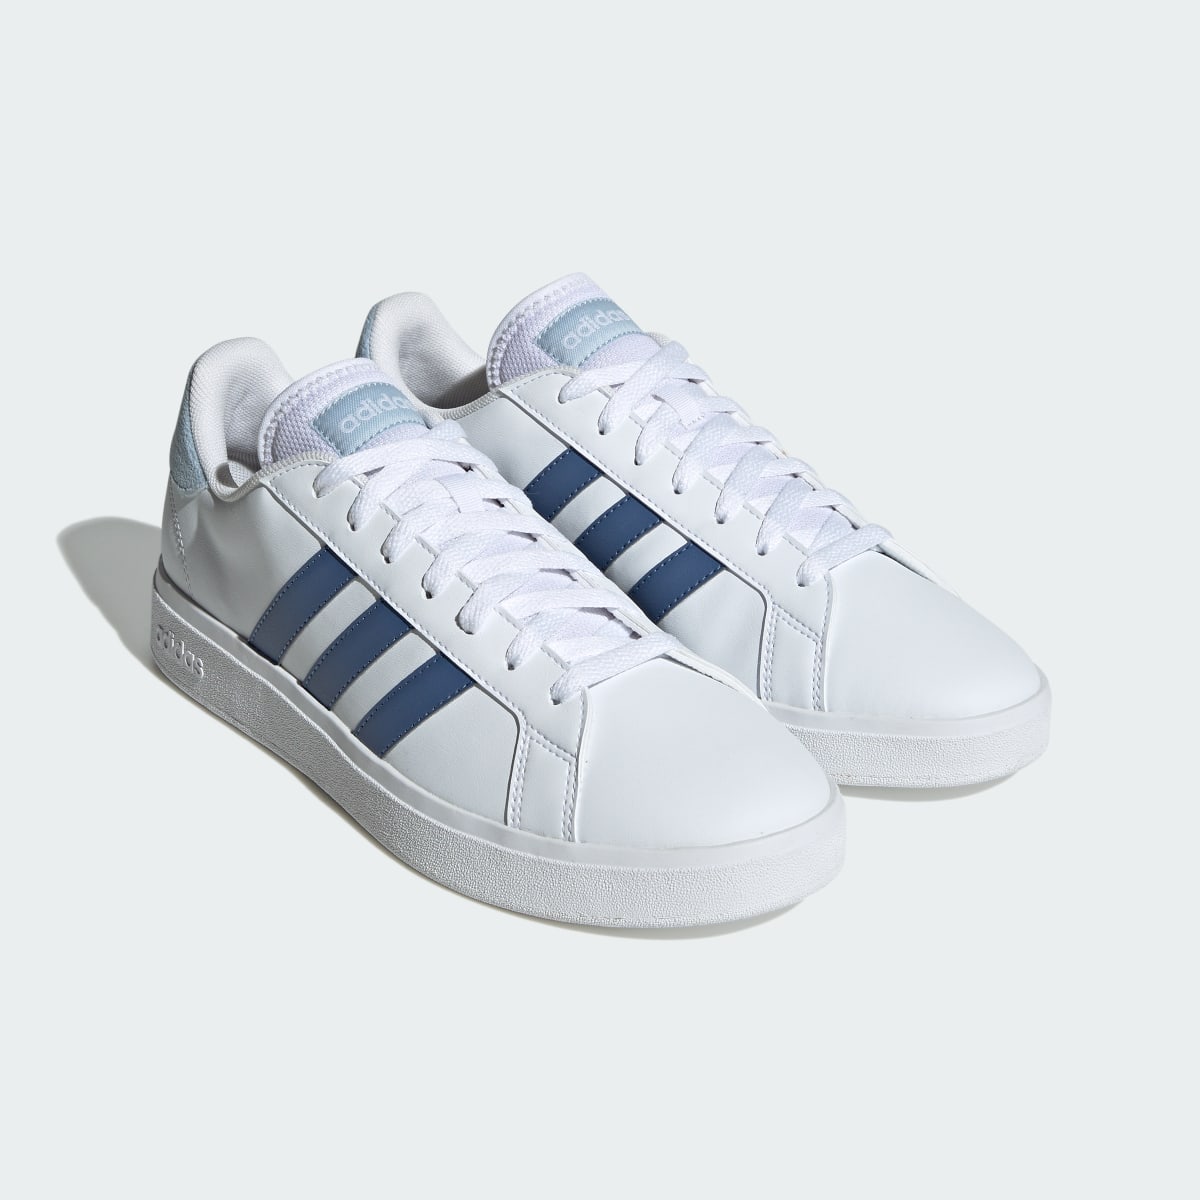 Adidas Grand Court TD Lifestyle Court Casual Shoes. 4